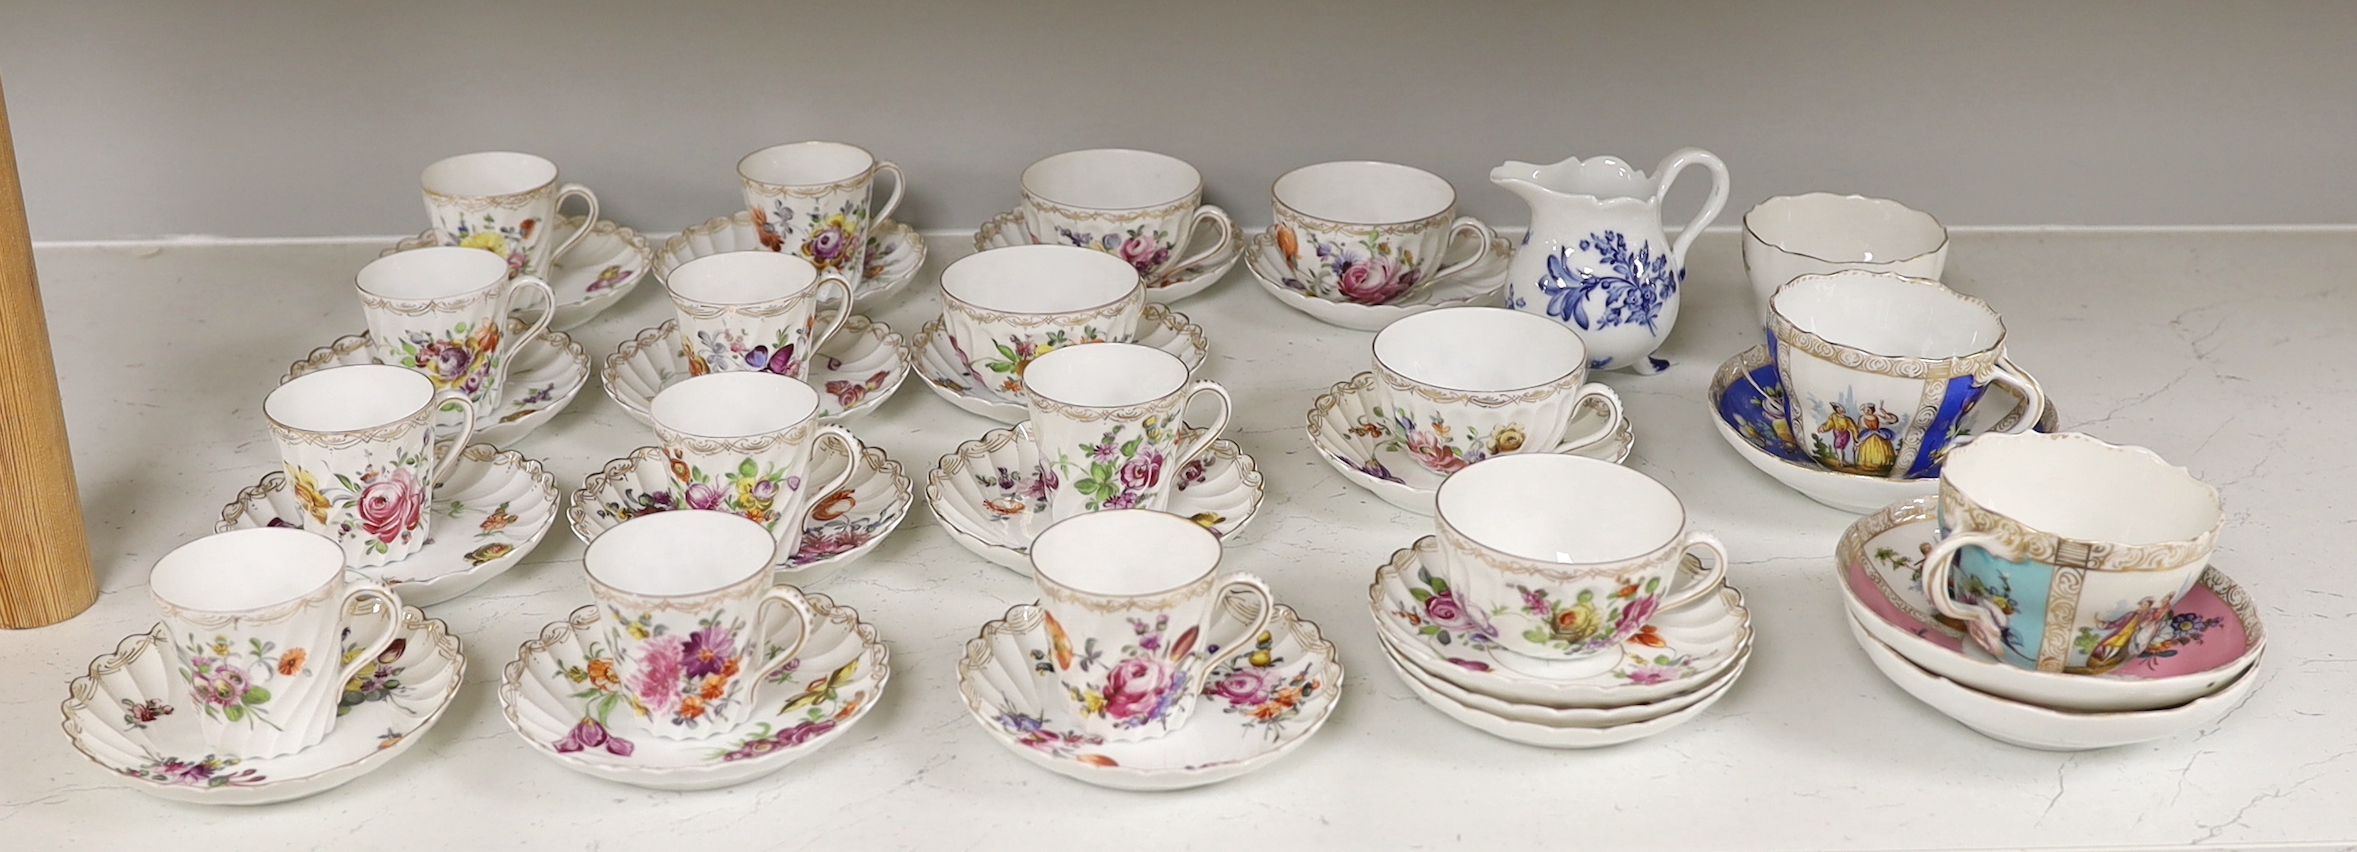 A group of porcelain Dresden tableware including cups and saucers and a blue and white jug